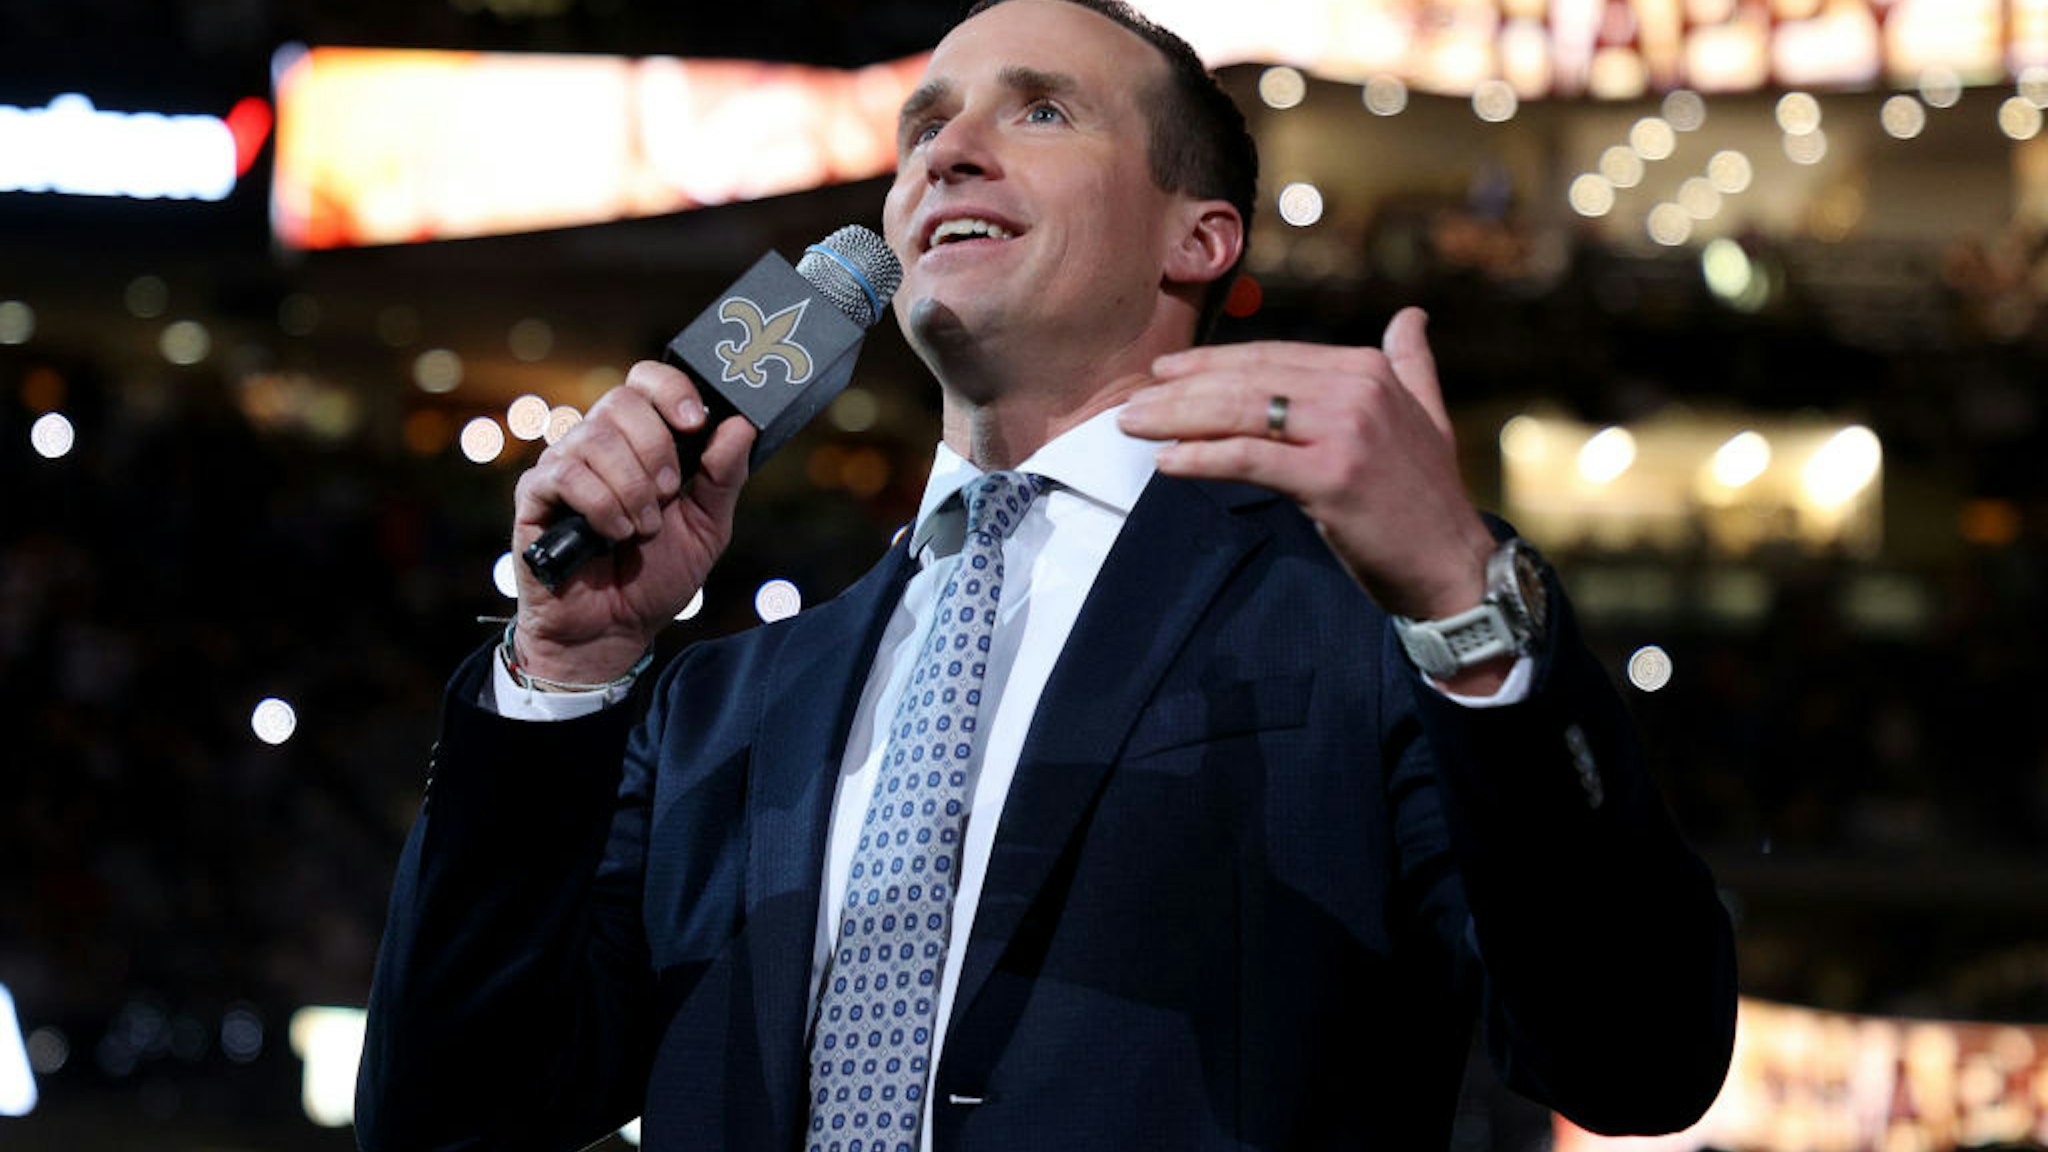 NEW ORLEANS, LOUISIANA - NOVEMBER 25: Former New Orleans Saints quarterback Drew Brees speaks to the fans during halftime of the game between the Buffalo Bills and the New Orleans Saints at Caesars Superdome on November 25, 2021 in New Orleans, Louisiana. (Photo by Chris Graythen/Getty Images)